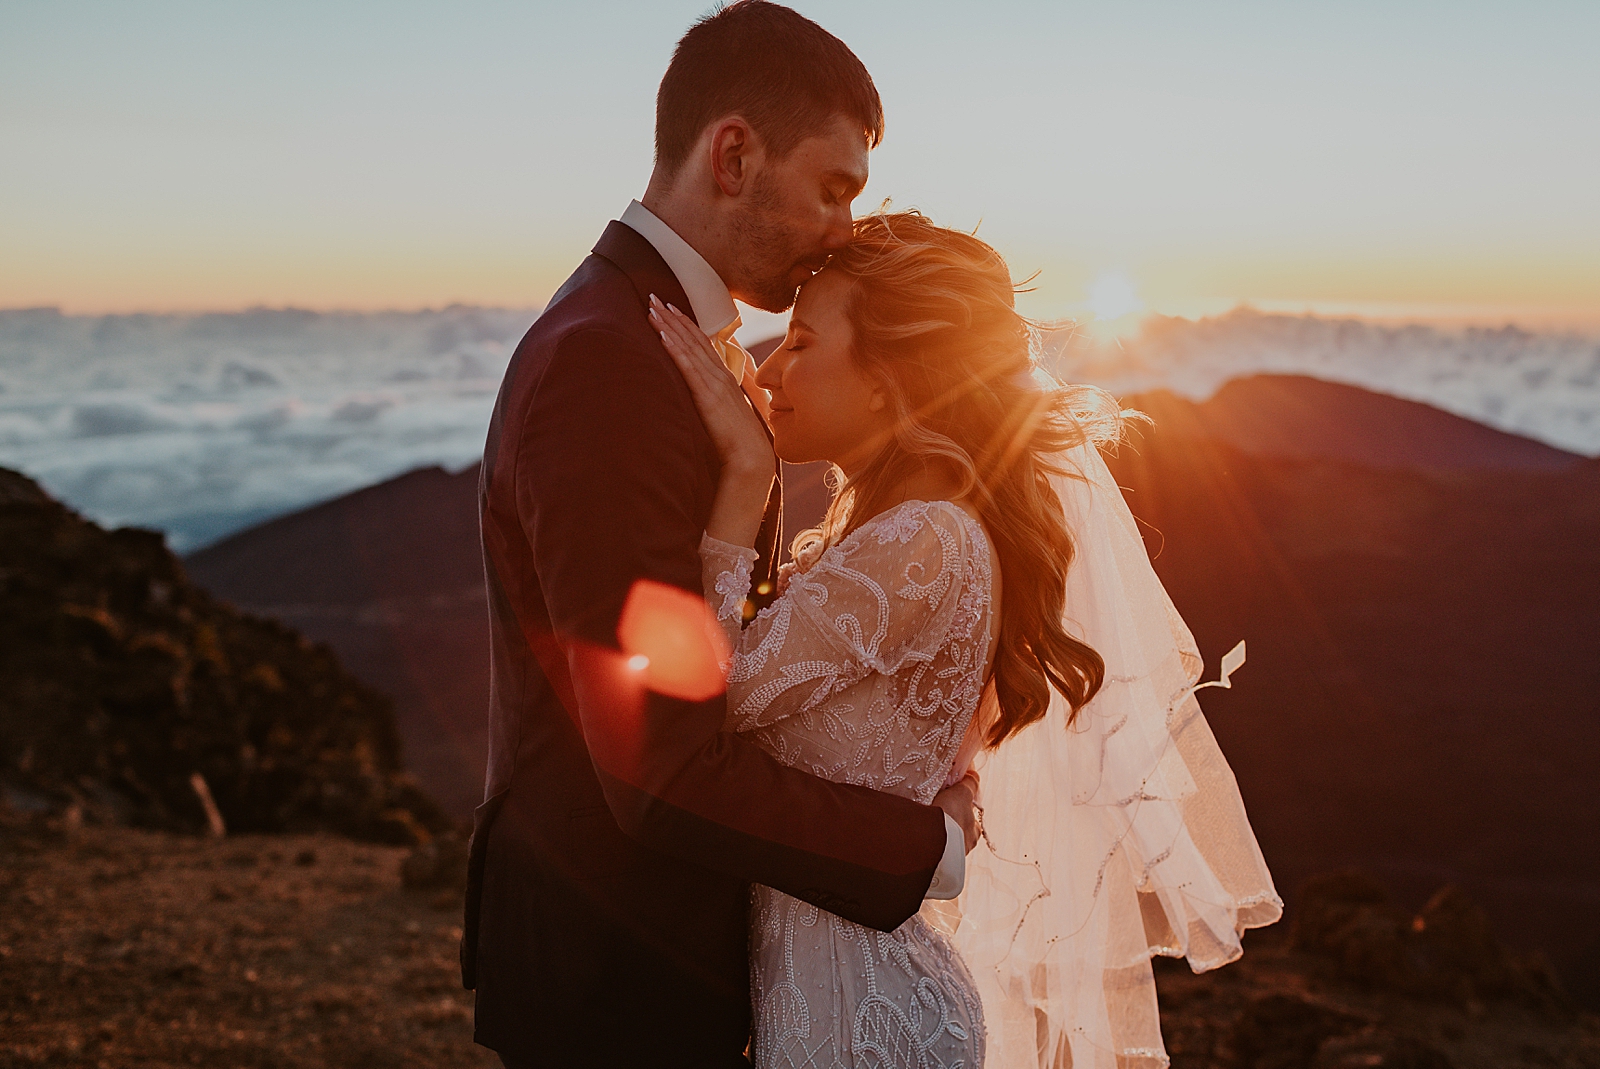 Groom holding Bride and kissing her on the forehead on the mountain